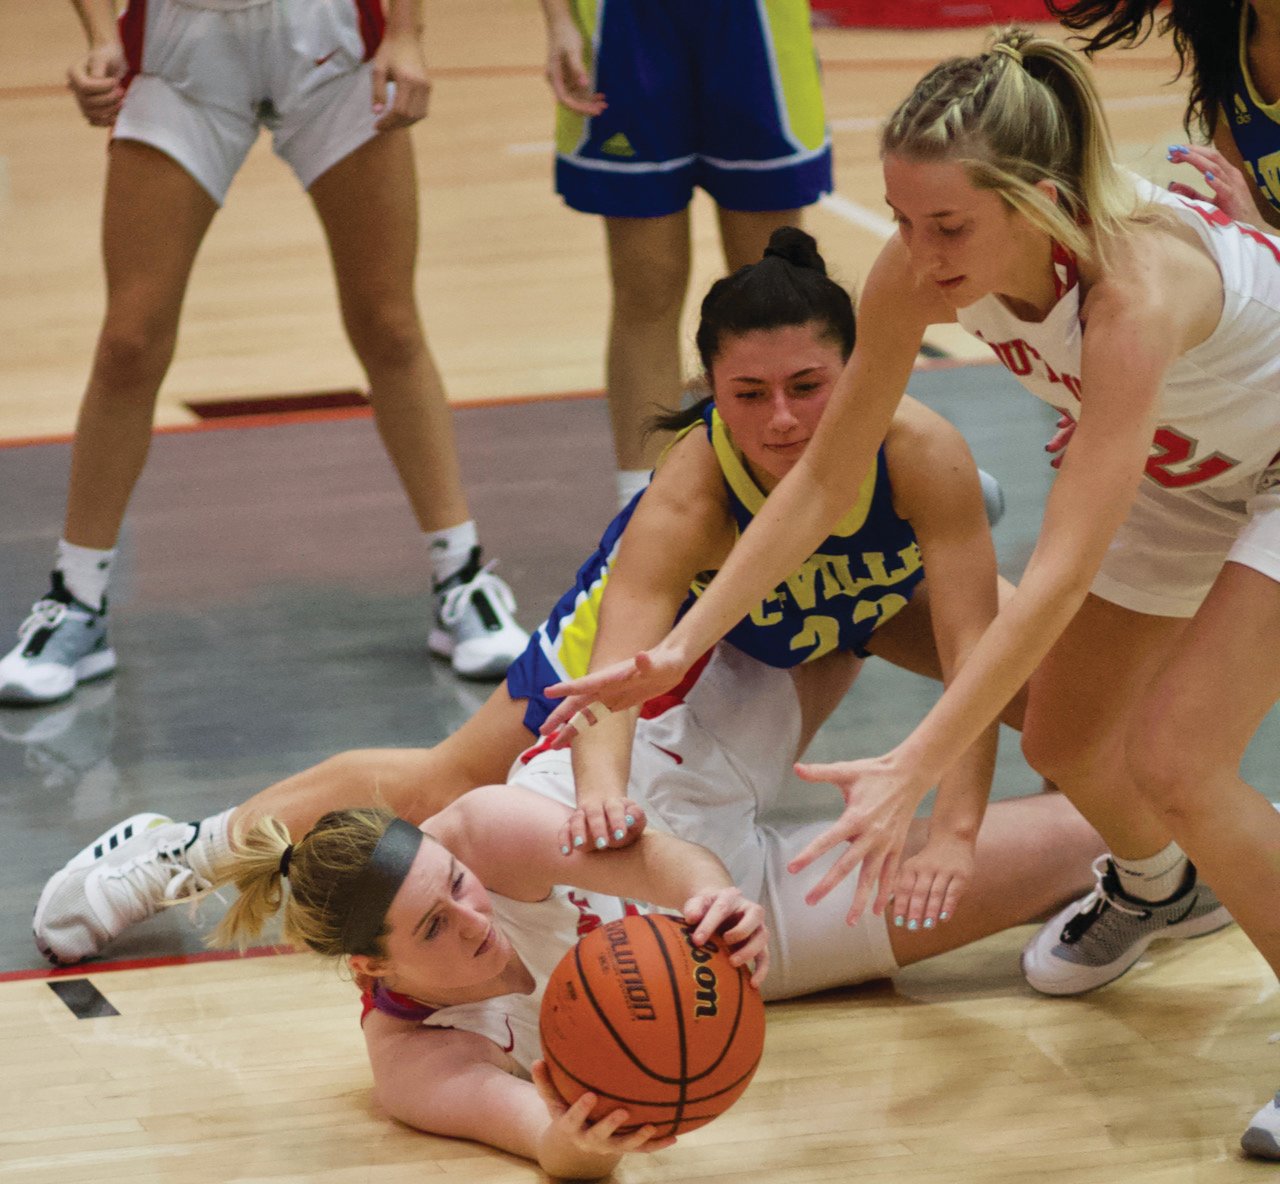 Crawfordsville’s Shea Williamson and Belle Miller fight for a loose ball.